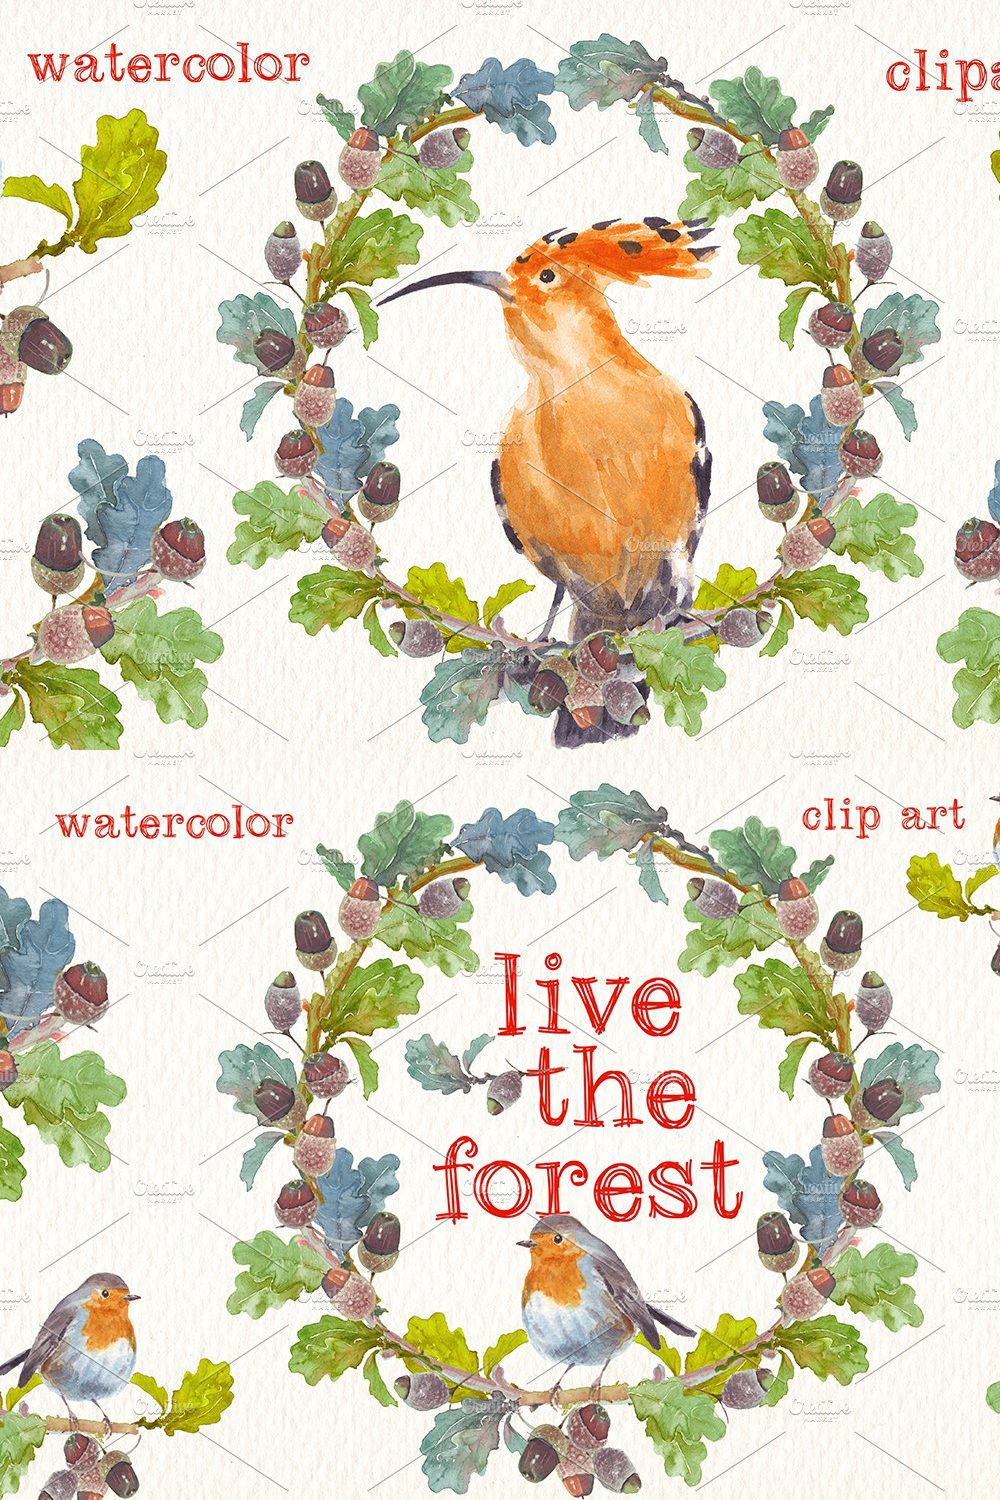 live the forest watercolor clipart pinterest preview image.